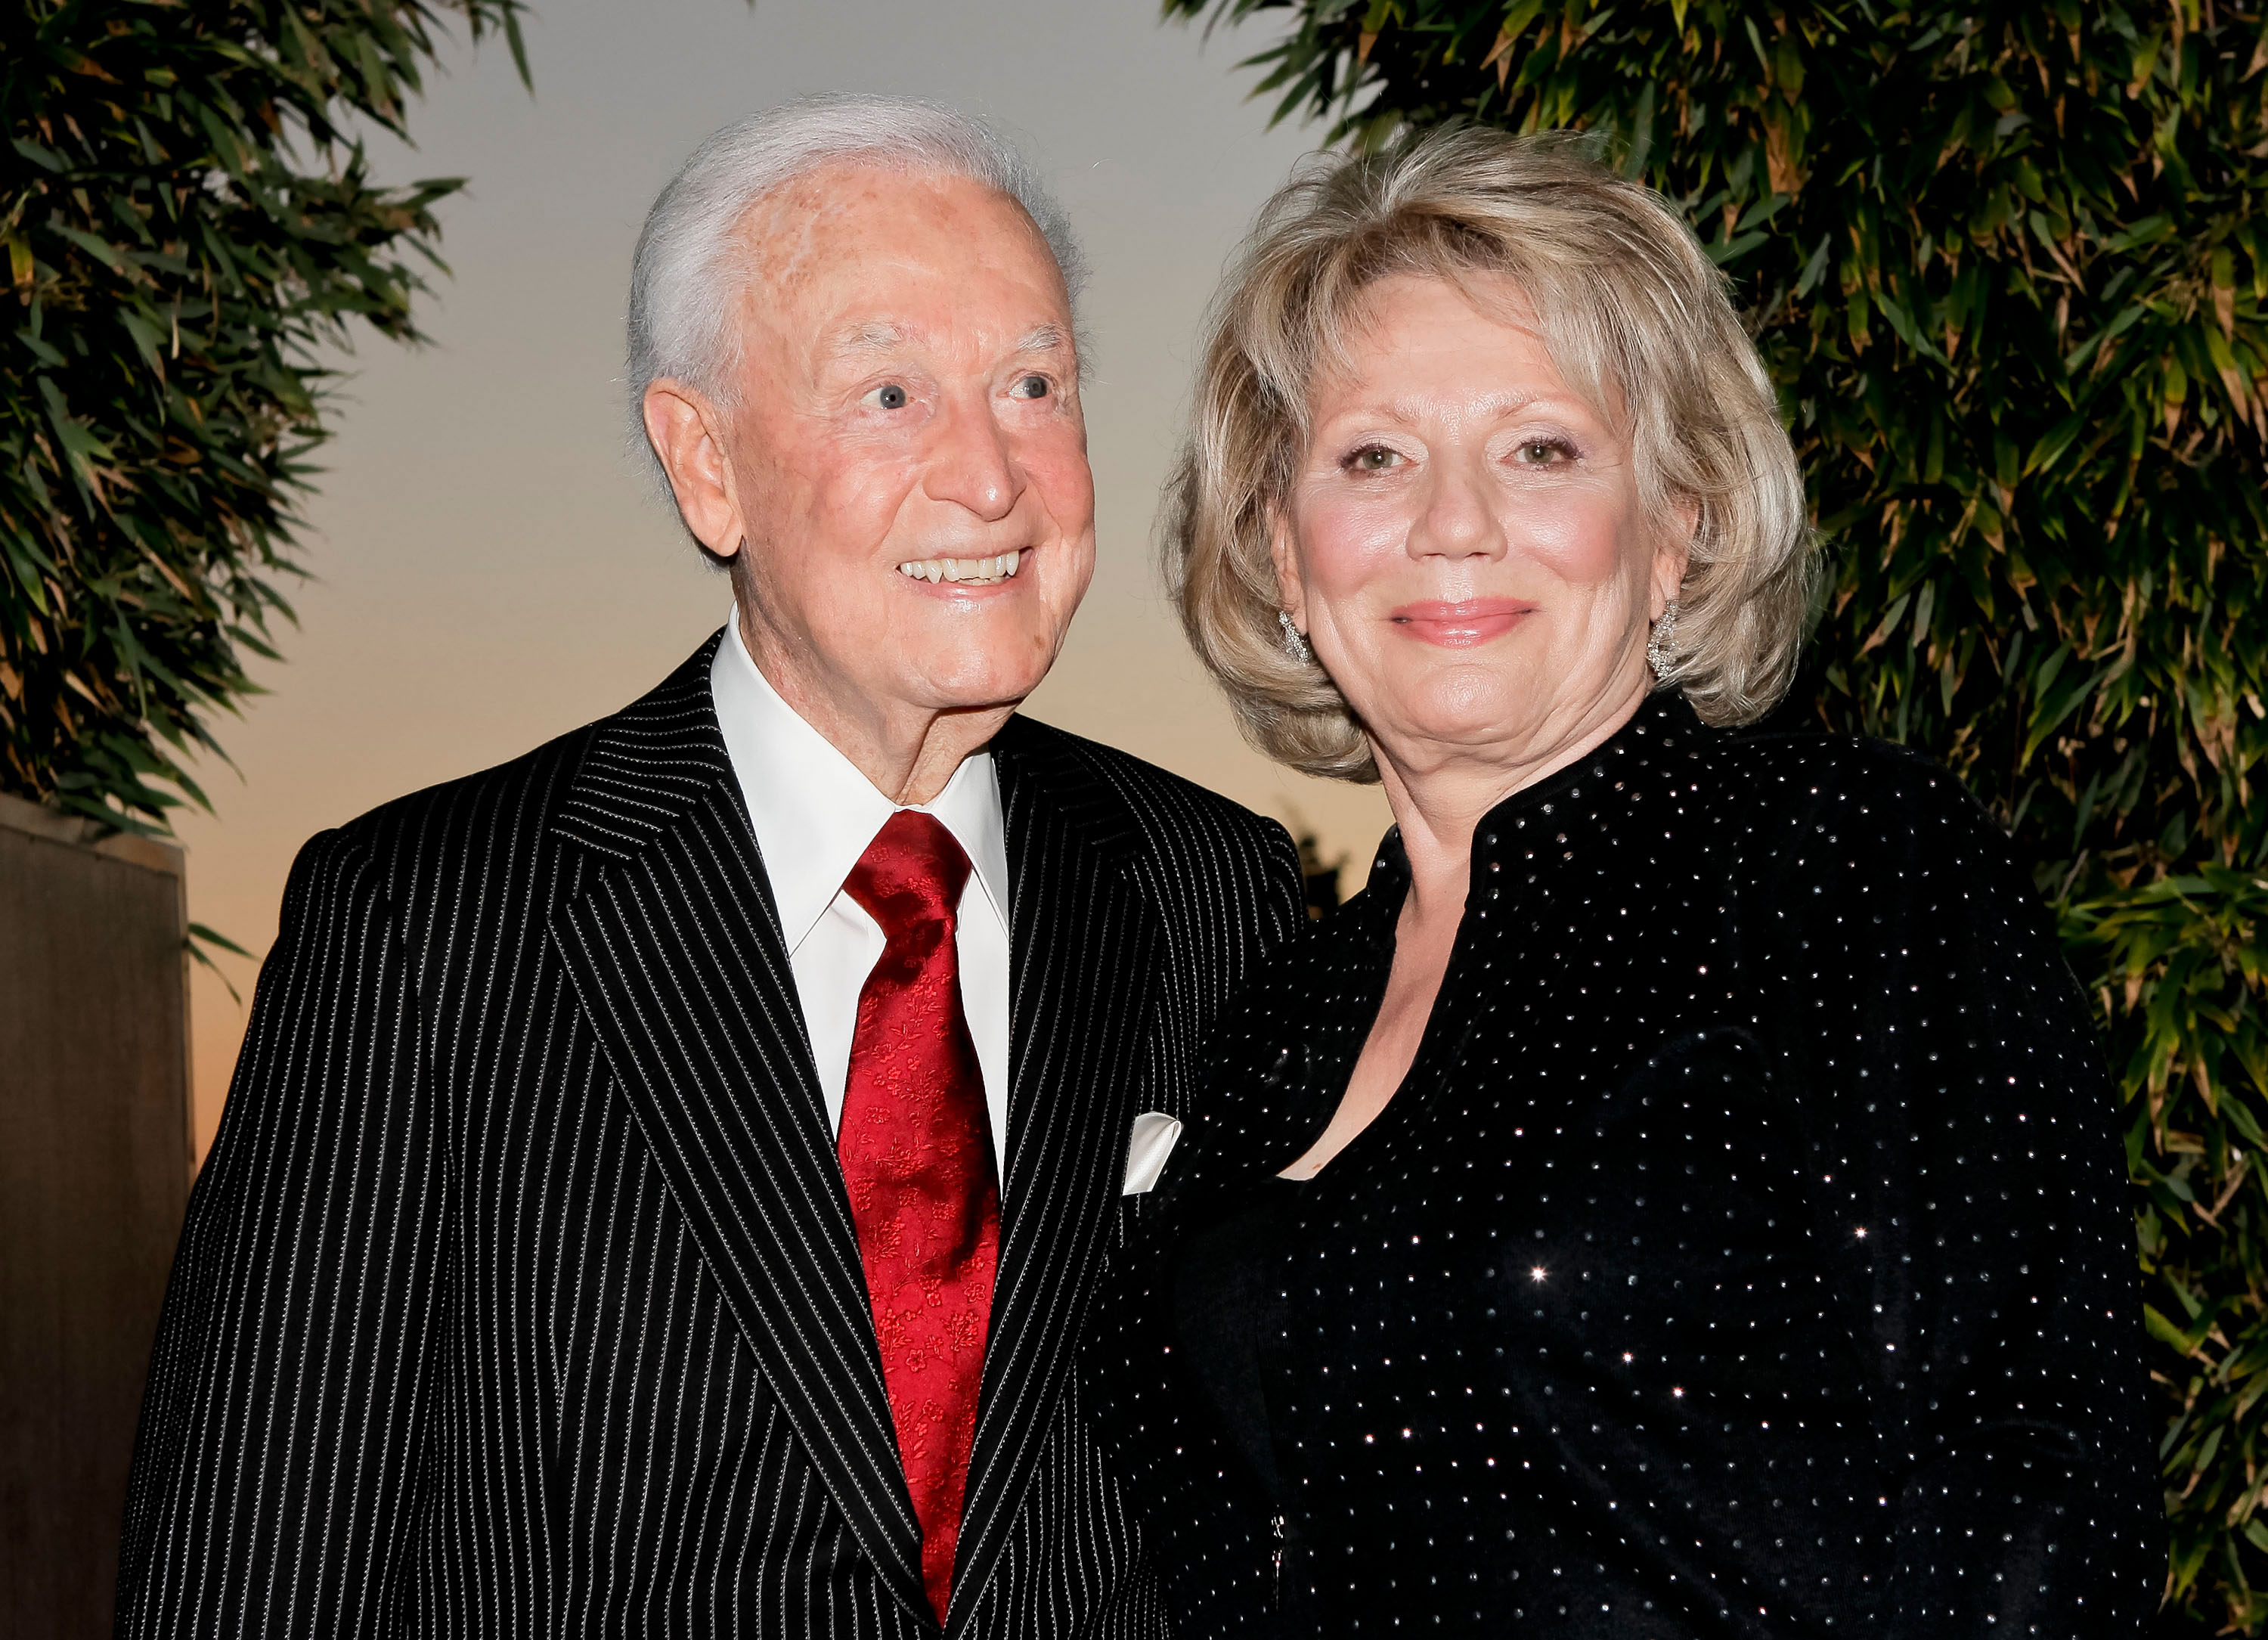 Bob Barker and Nancy Burnet attend the Animal Defenders International gala on October 13, 2012, in Hollywood, California.| Source: Getty Images